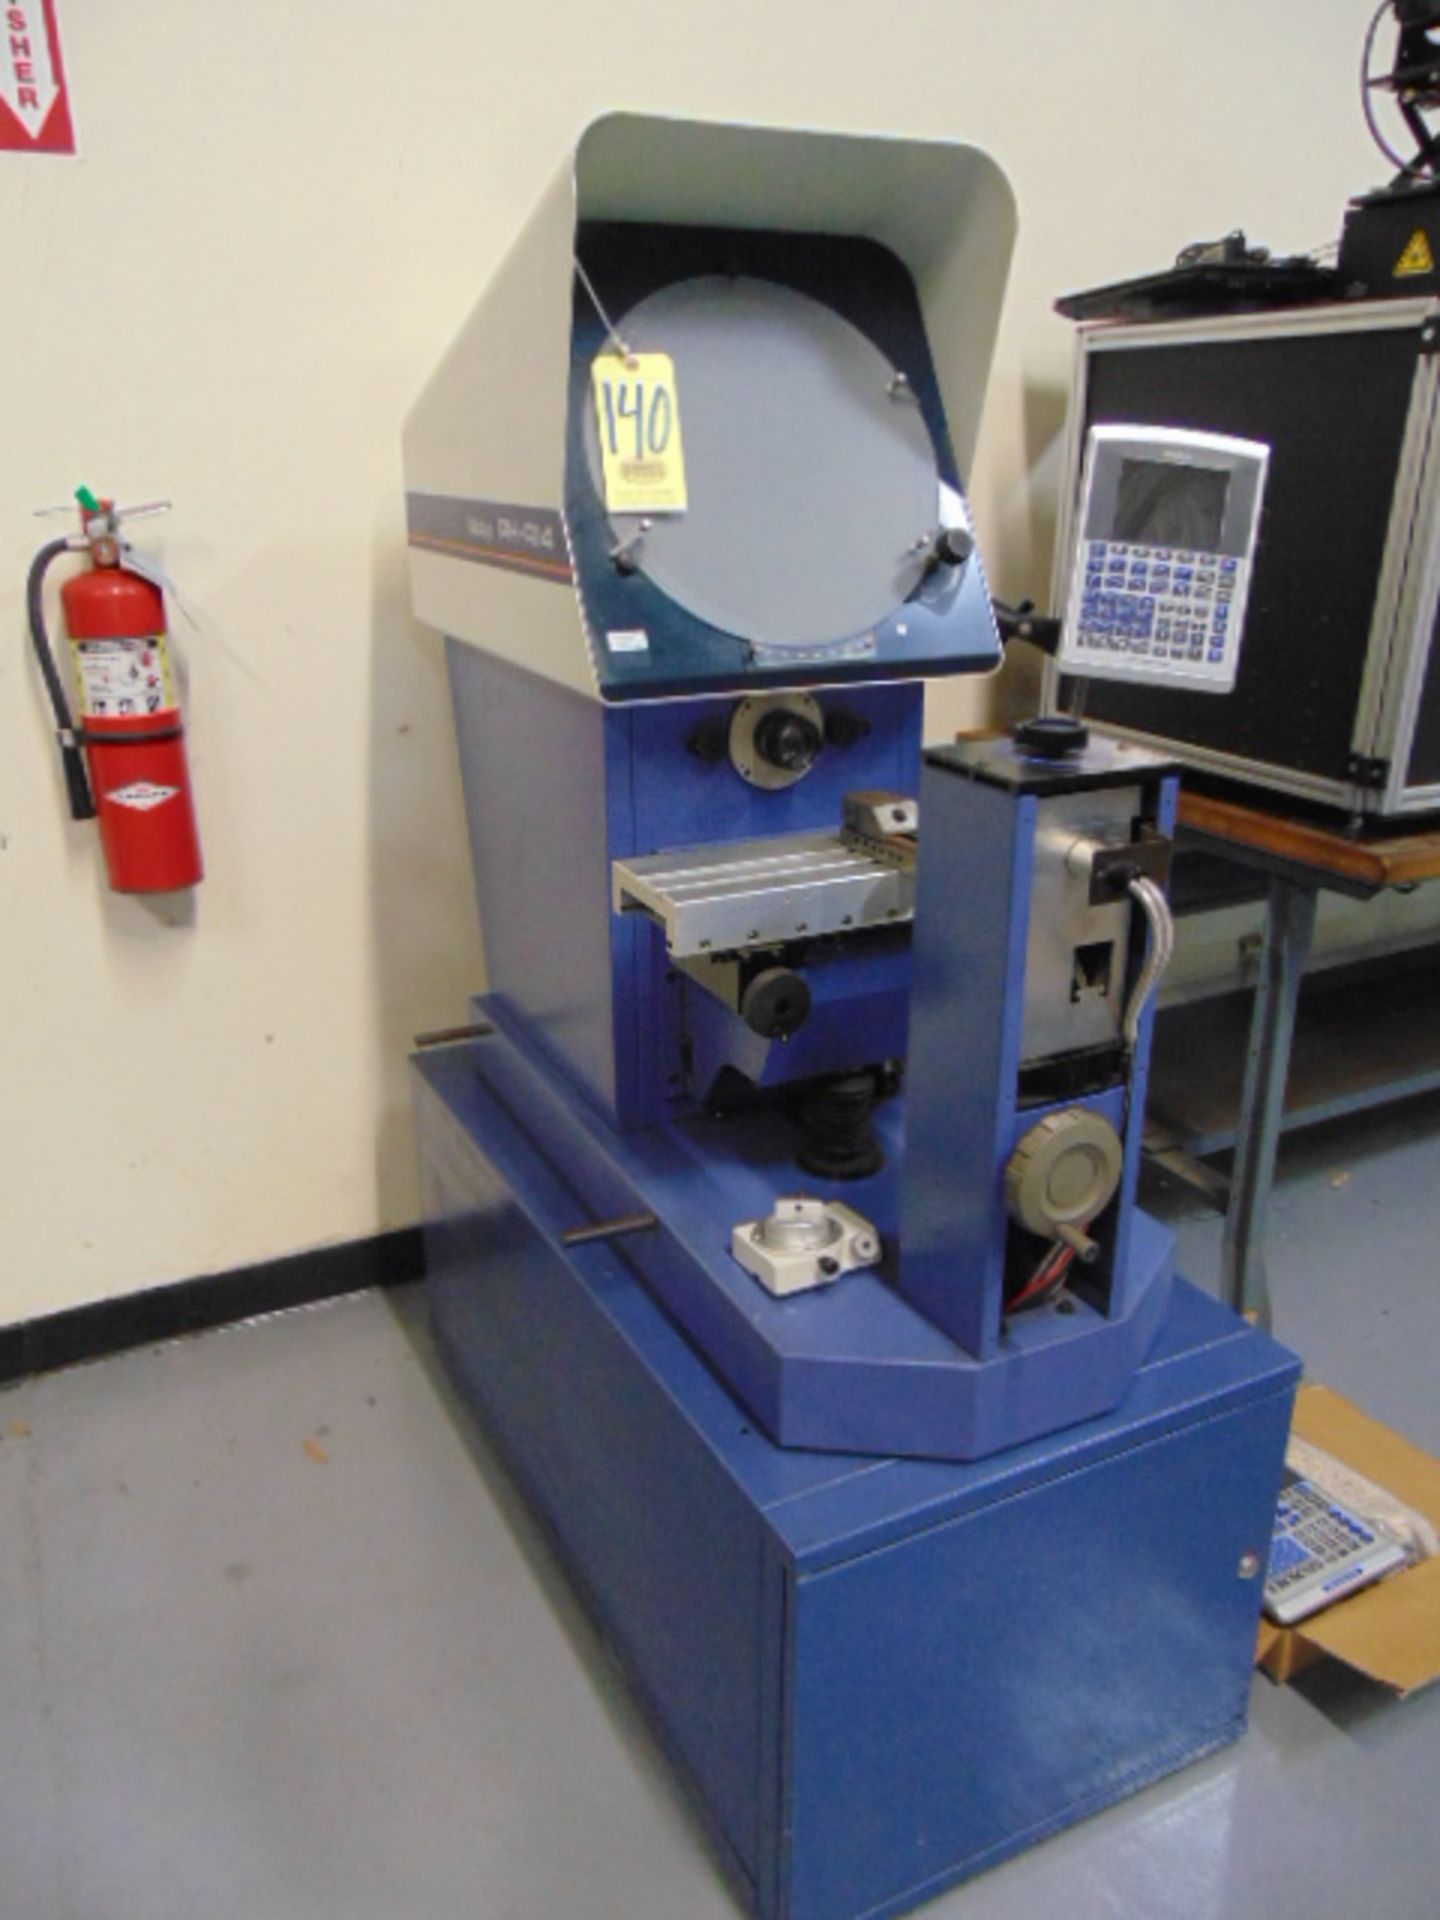 OPTICAL COMPARATOR, MITUTOYO 14” MDL. PH-A14, Mitutoyo Mdl. QM-Data 200 display, S/N HMD-907